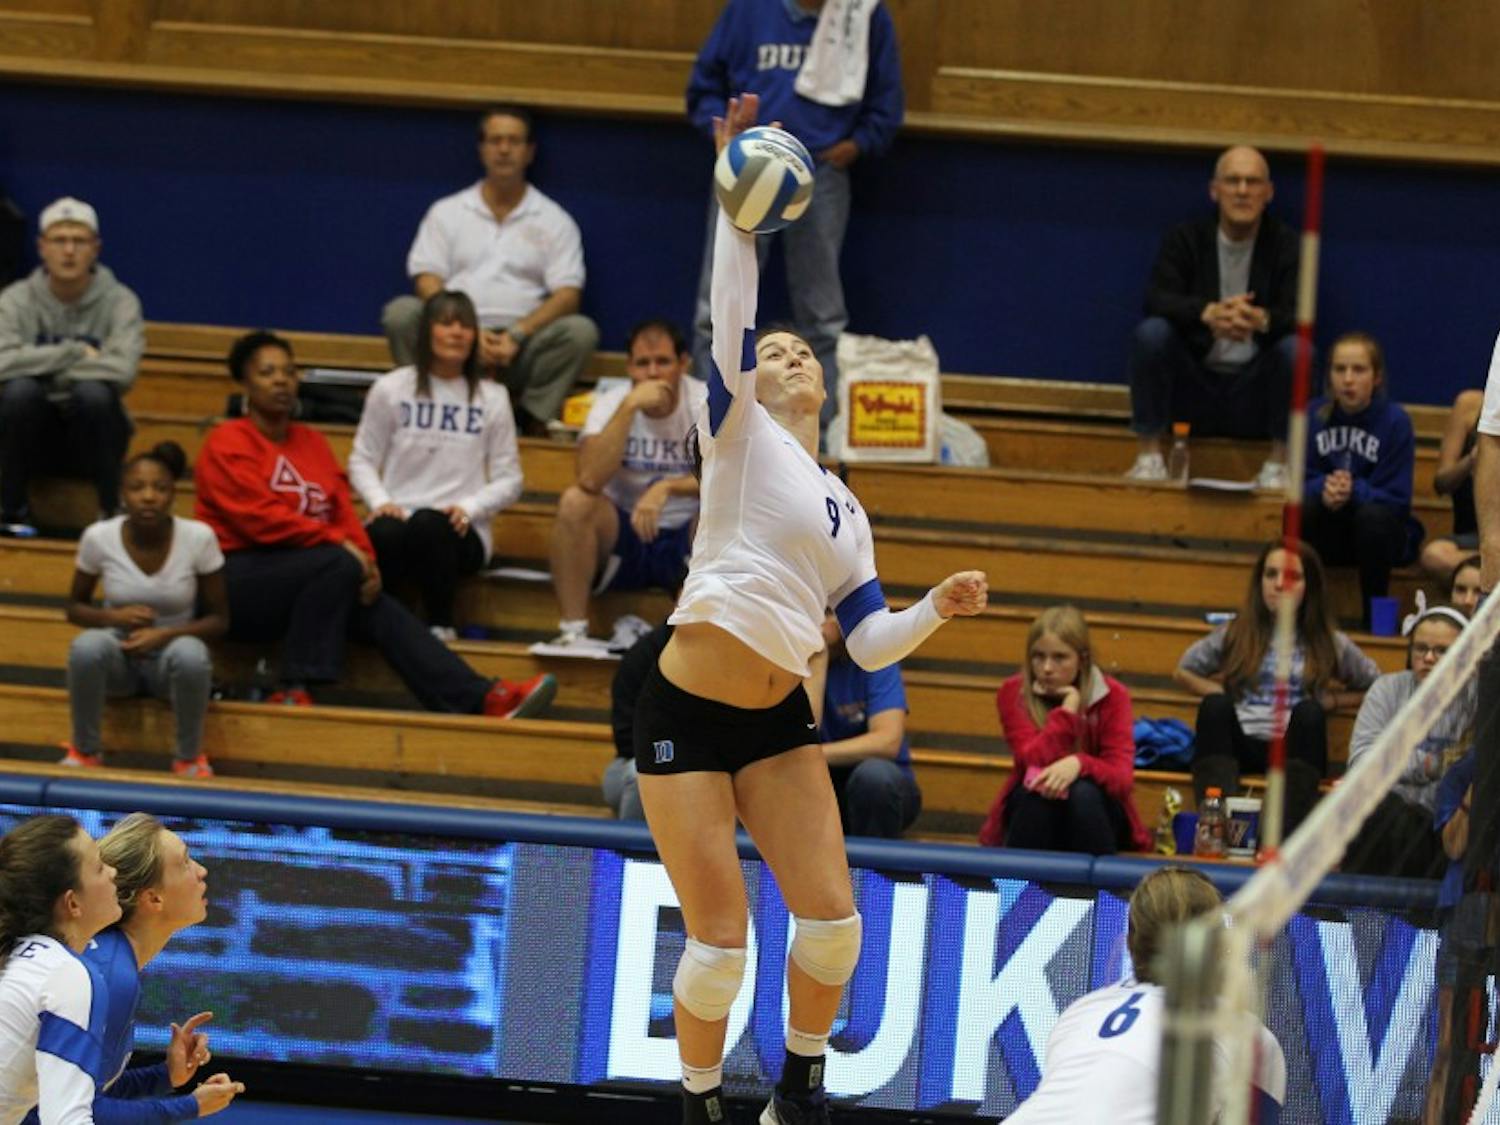 Senior outside hitter Emily Sklar leads a deep and talented Blue Devil front line that hopes to carry the club back to the top of the ACC after a disappointing 2014 season.